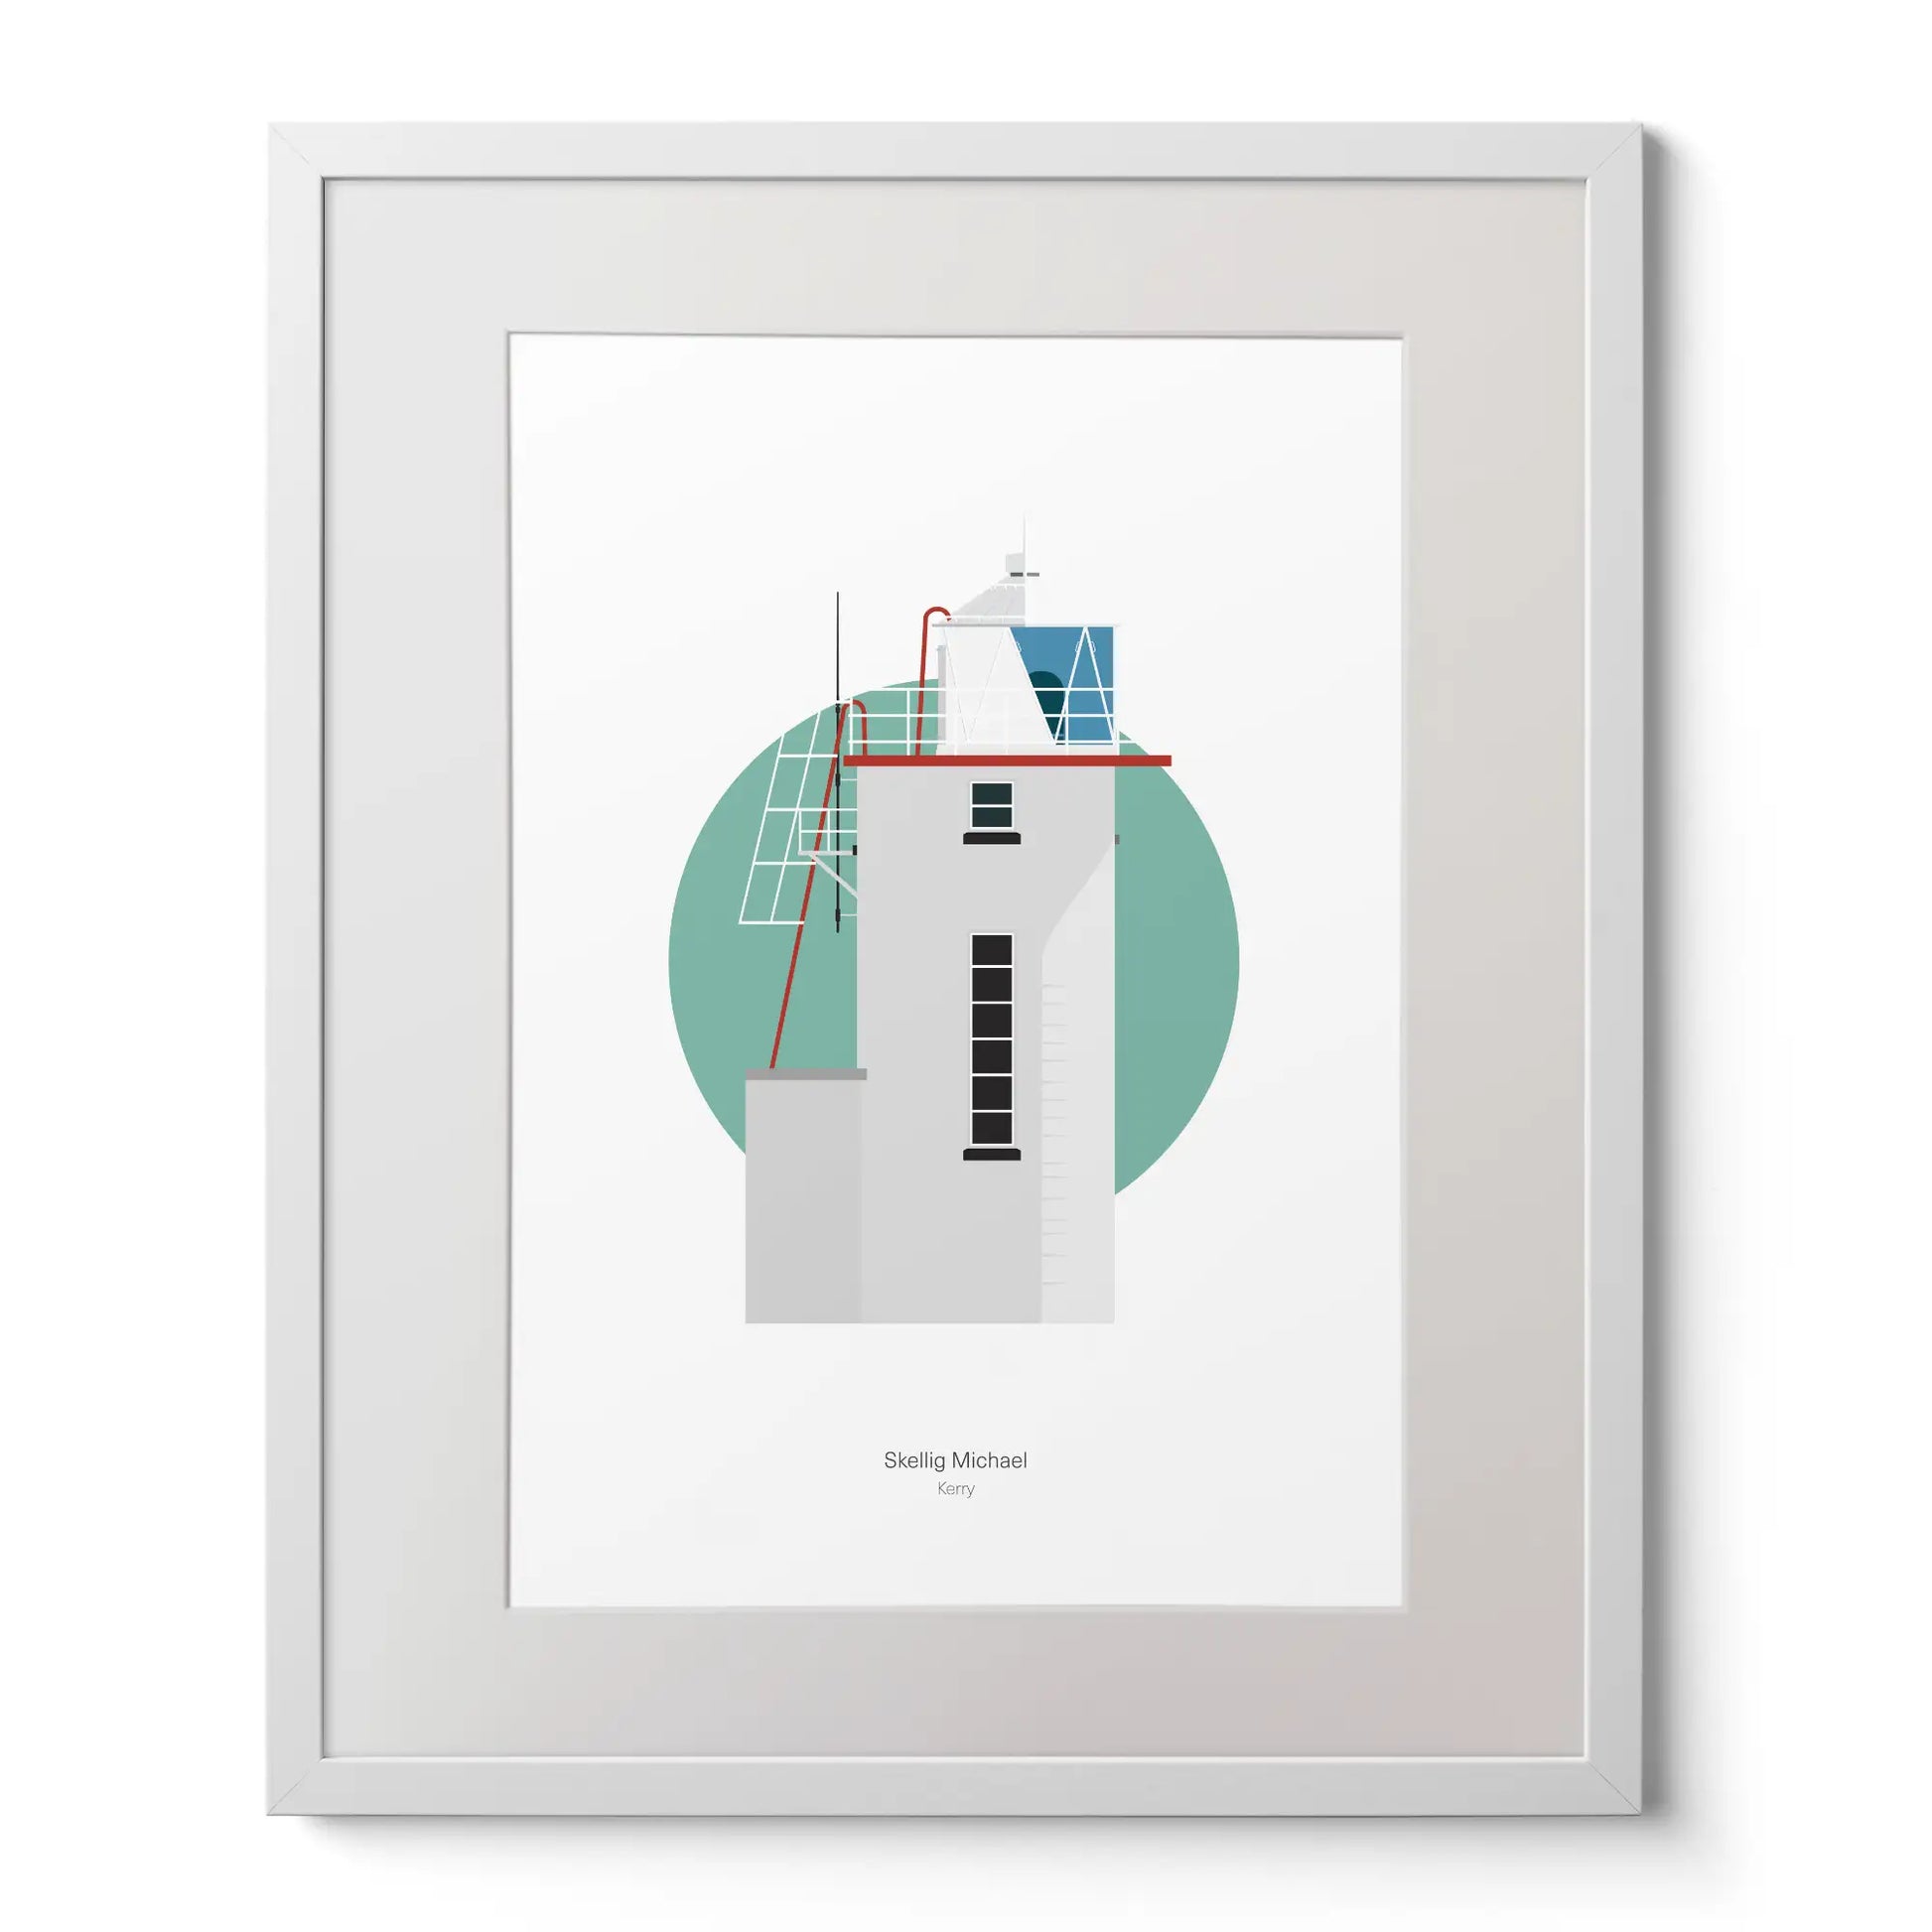 Illustration of Skelligs lighthouse on a white background inside light blue square,  in a white frame measuring 40x50cm.